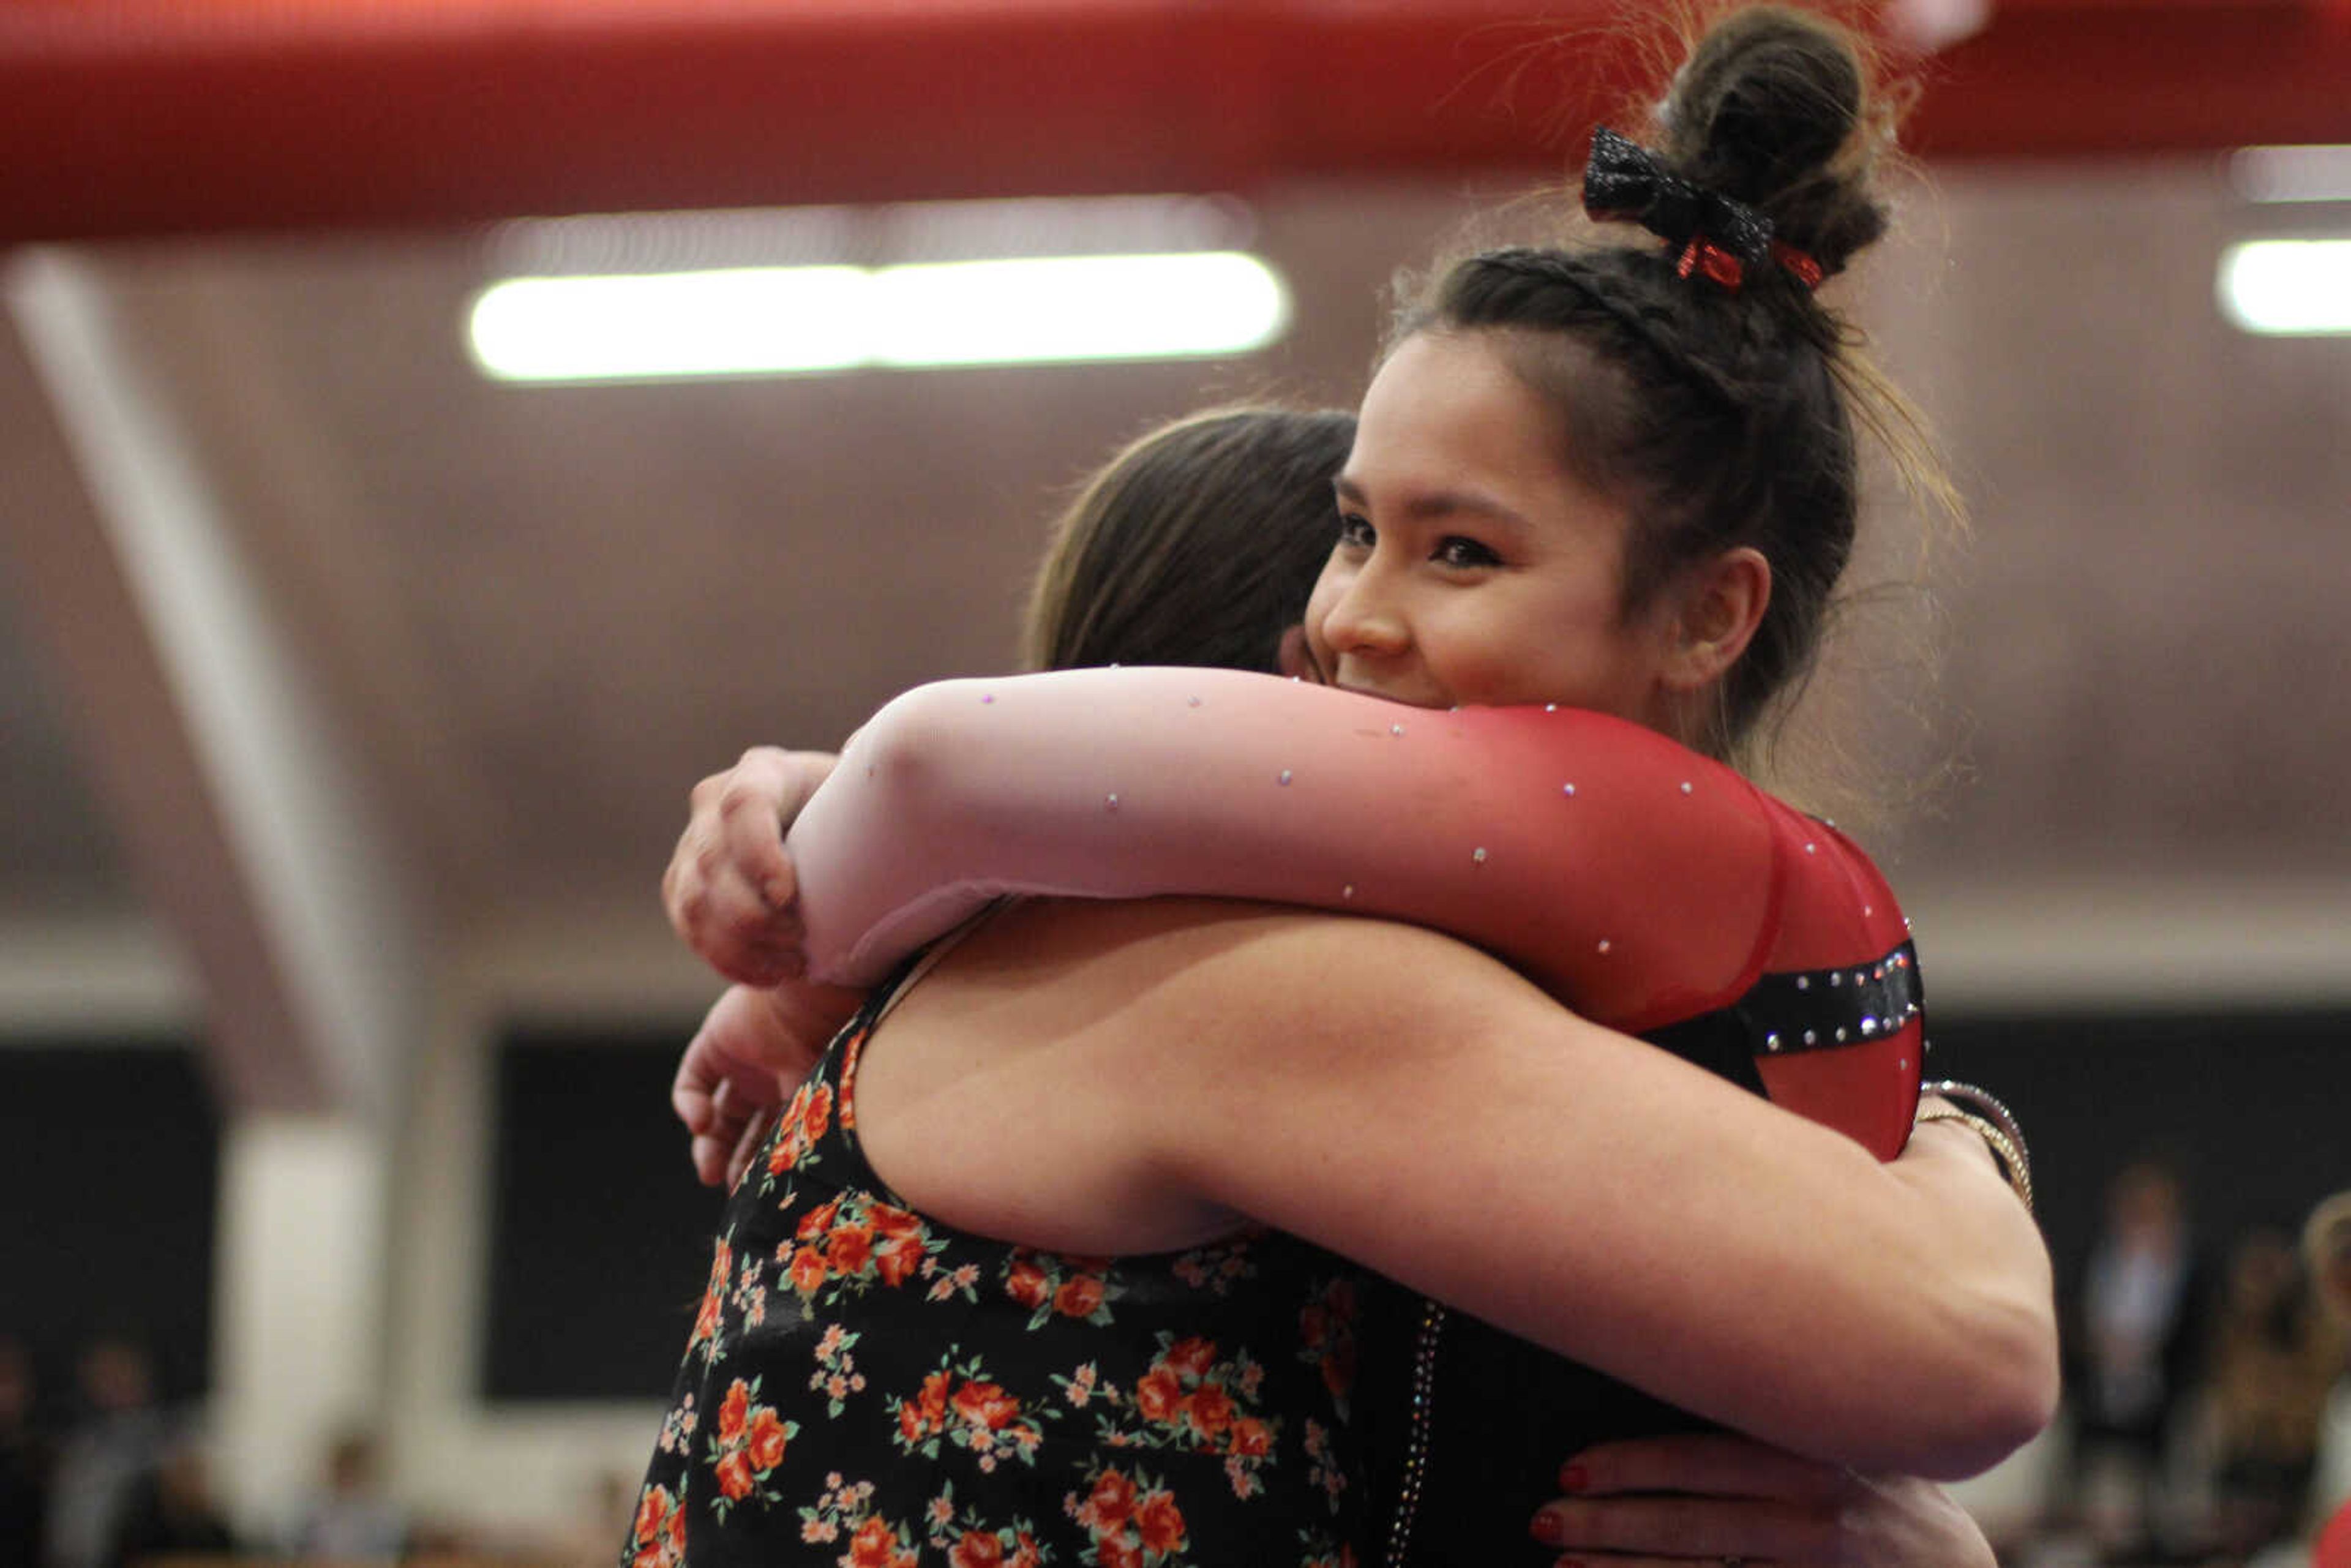 Freshman Anna Kaziska embraces Southeast coach Ashley Lawson after performing her beam routine on March 1 at Houck Field House.